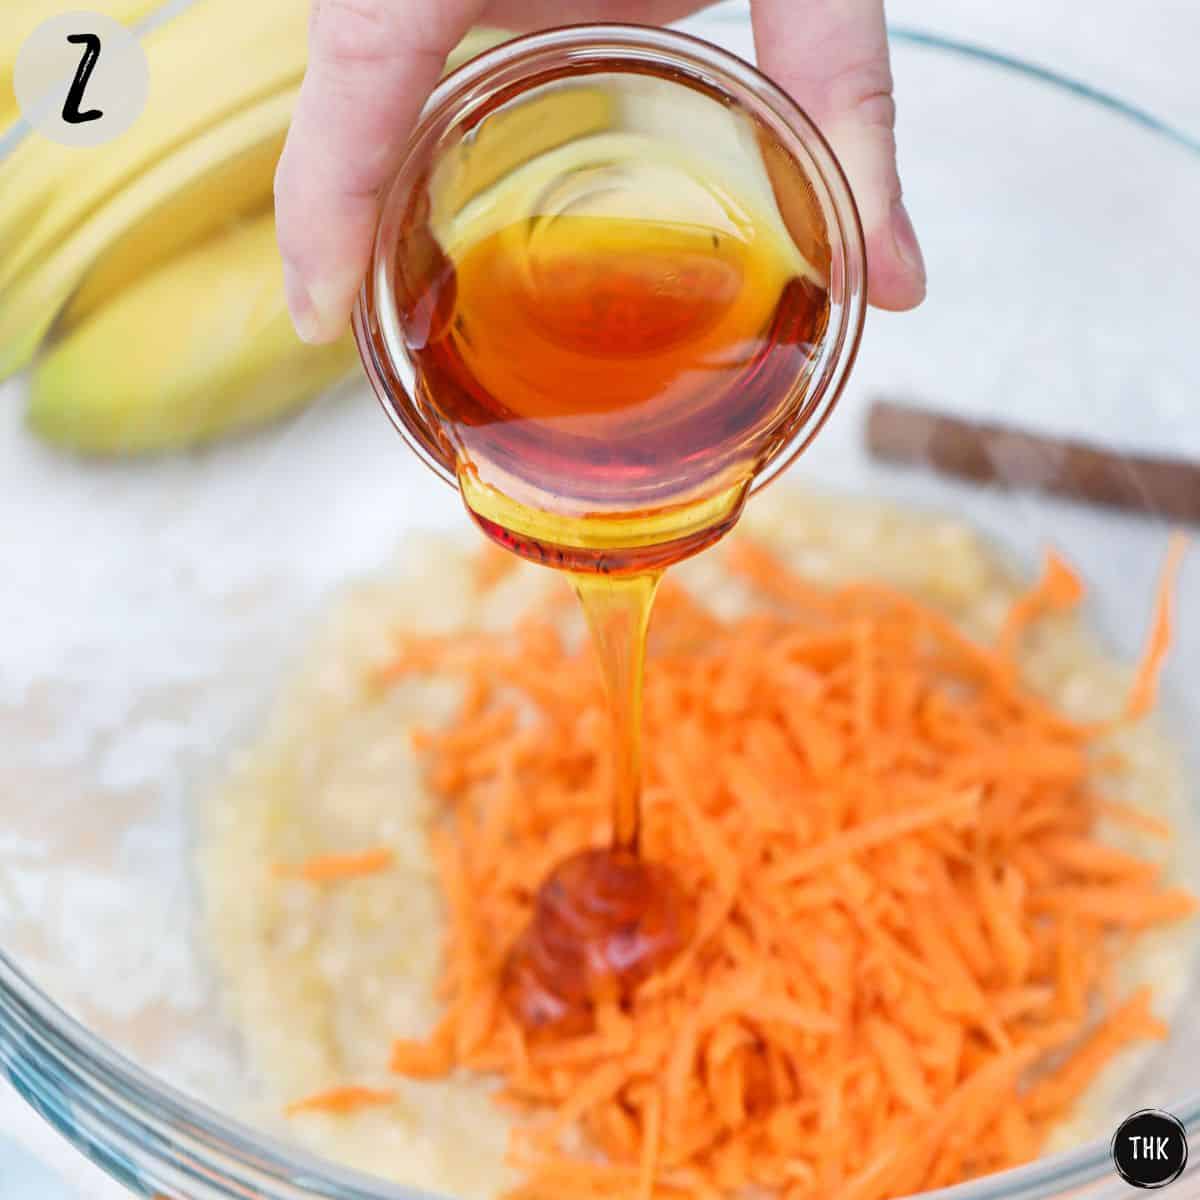 Maple syrup being poured into bowl with mashed banana and shredded carrot.